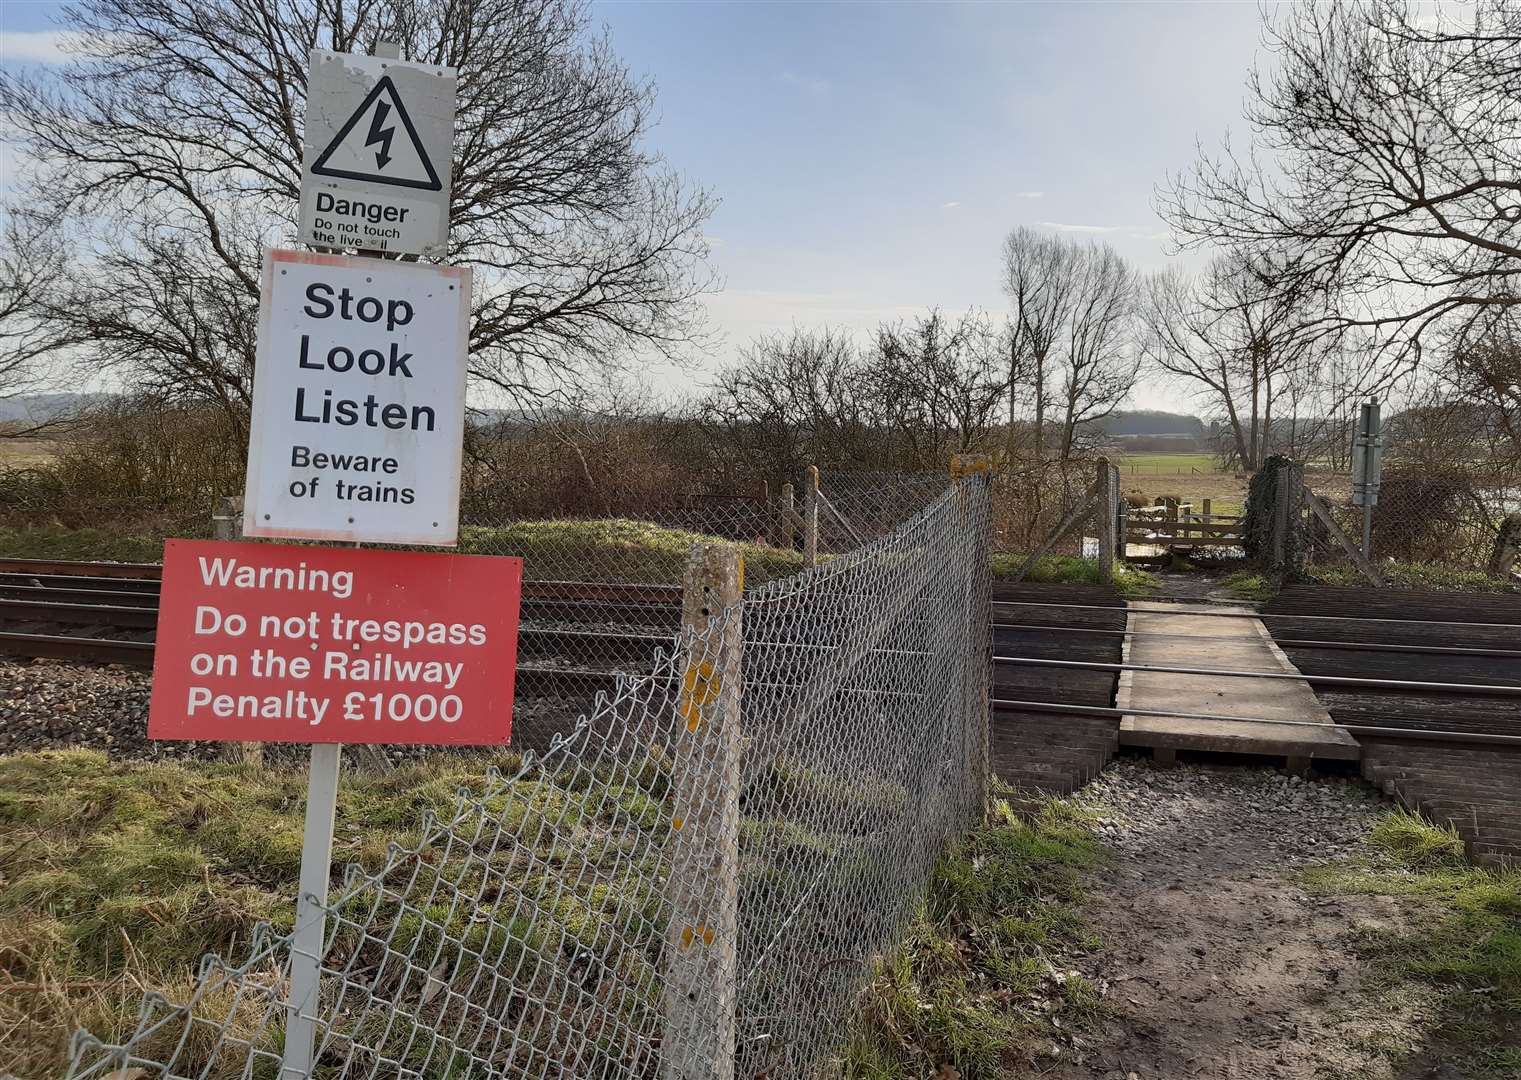 A new pedestrian and cycle bridge over the railway line will be included in the project